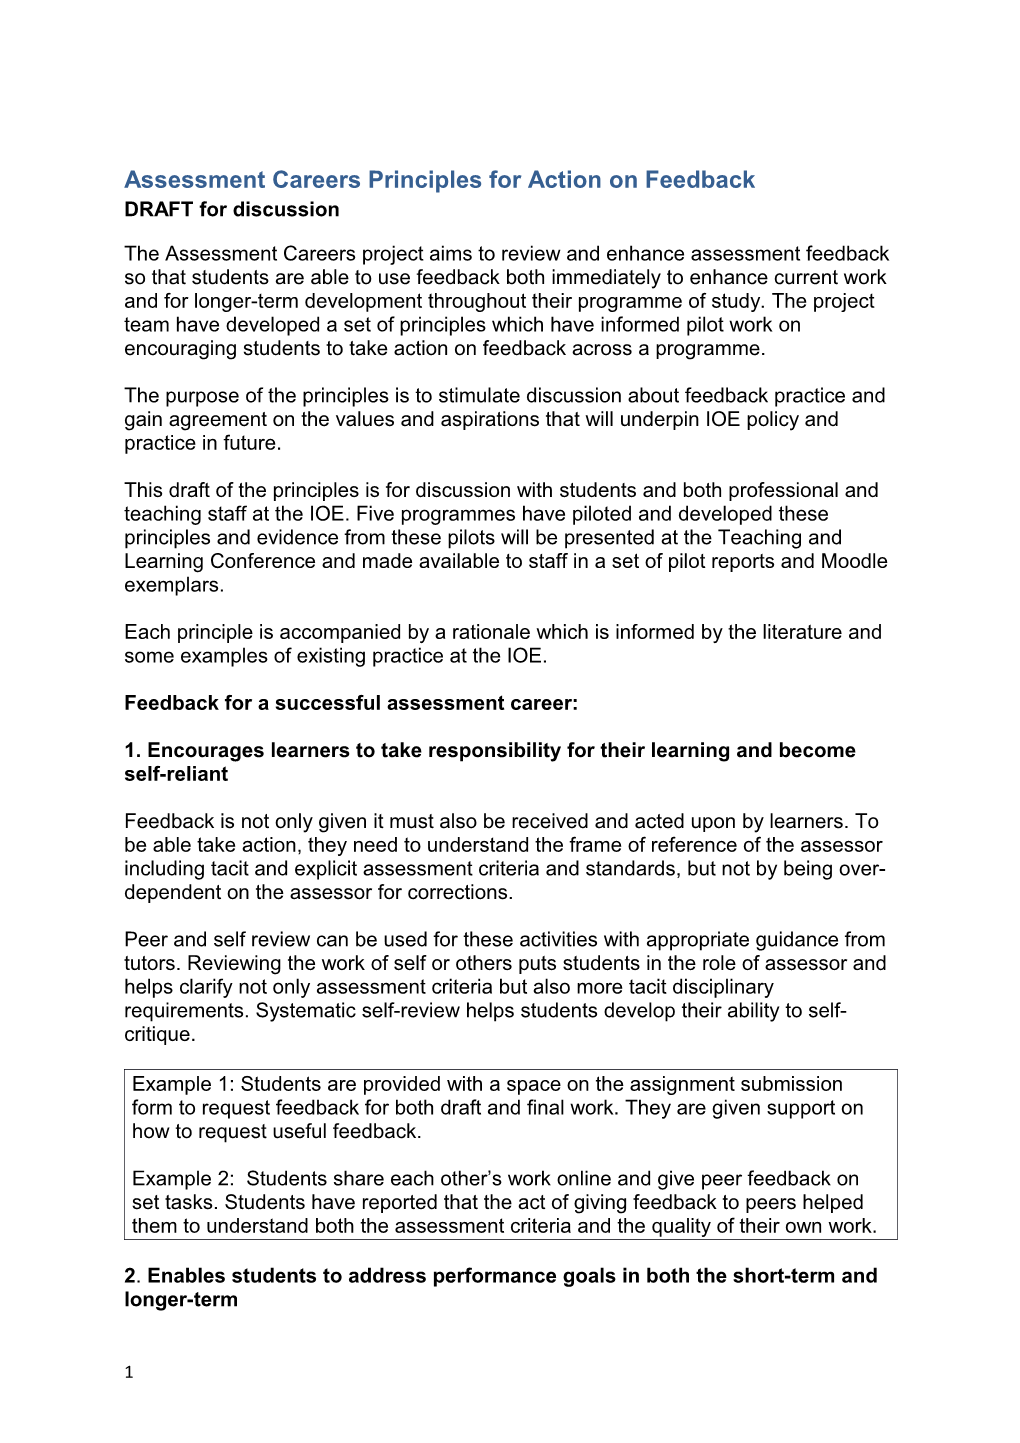 Assessment Careers Principles for Action on Feedback